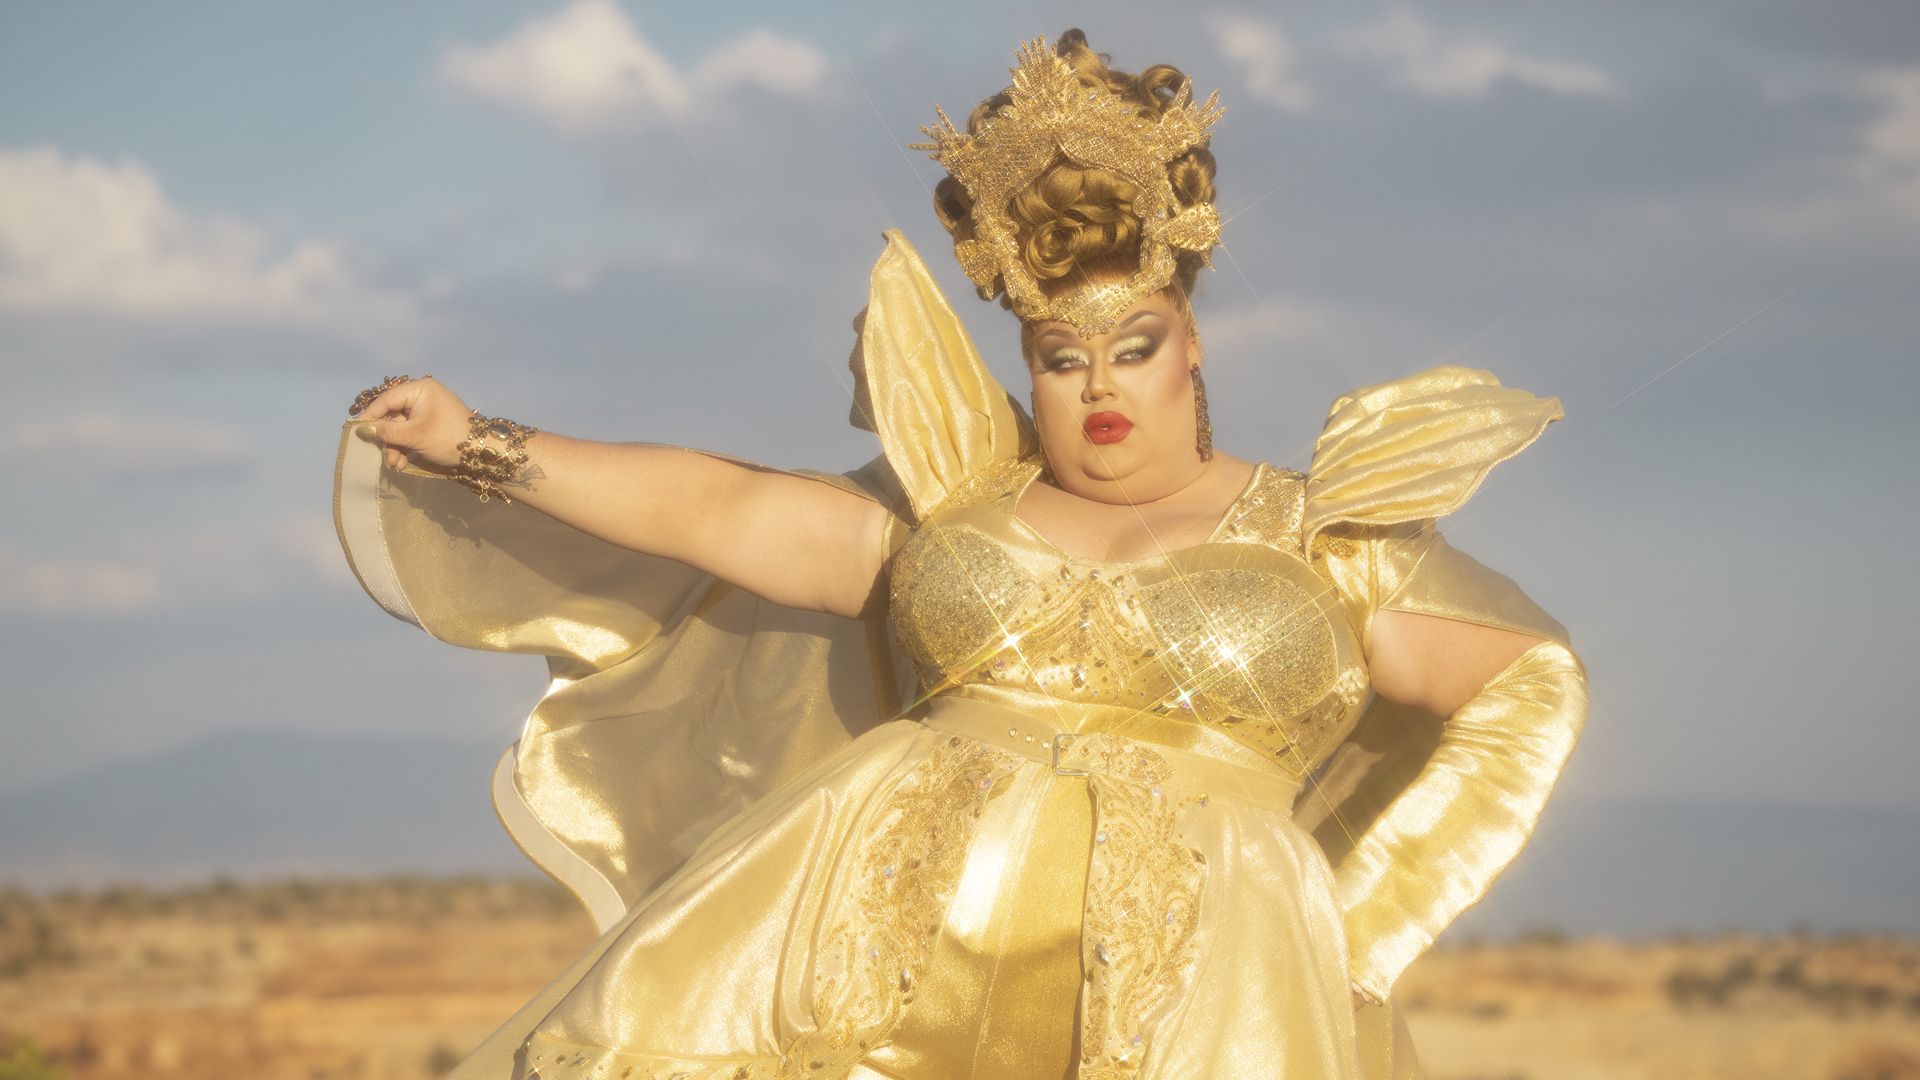 Drag queen Eureka poses in a desert during an episode of the HBO reality show "We're Here." Photo courtesy of HBO. 